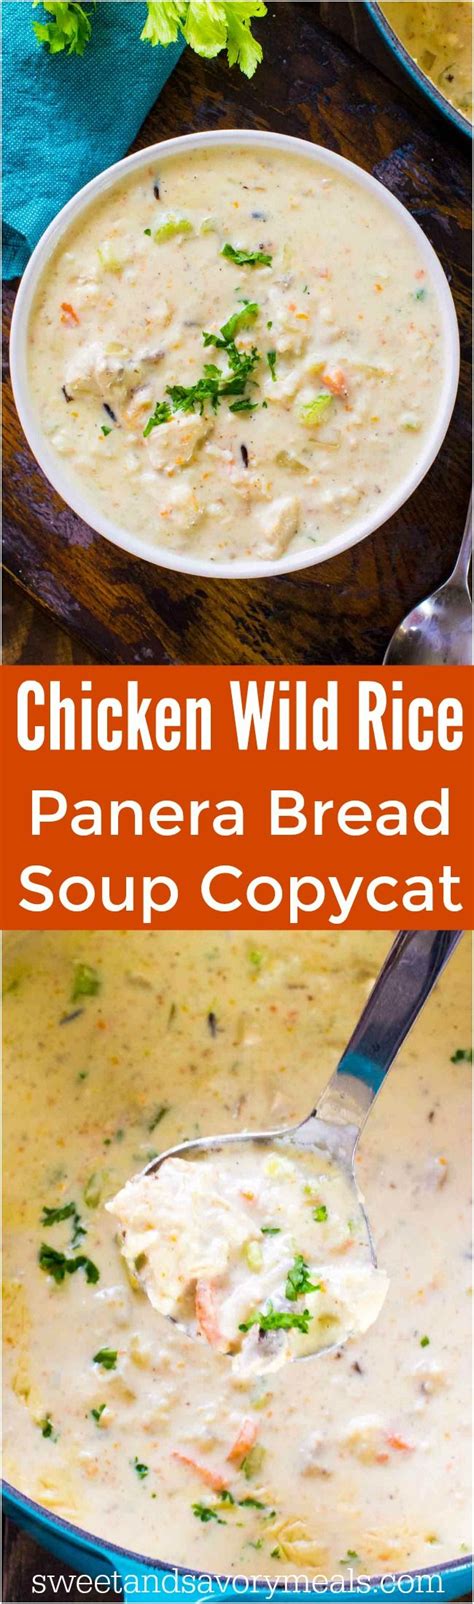 Pair this soup with a seasonal salad or turn it into this delicious. Panera Bread Chicken Wild Rice Soup Copycat [VIDEO ...